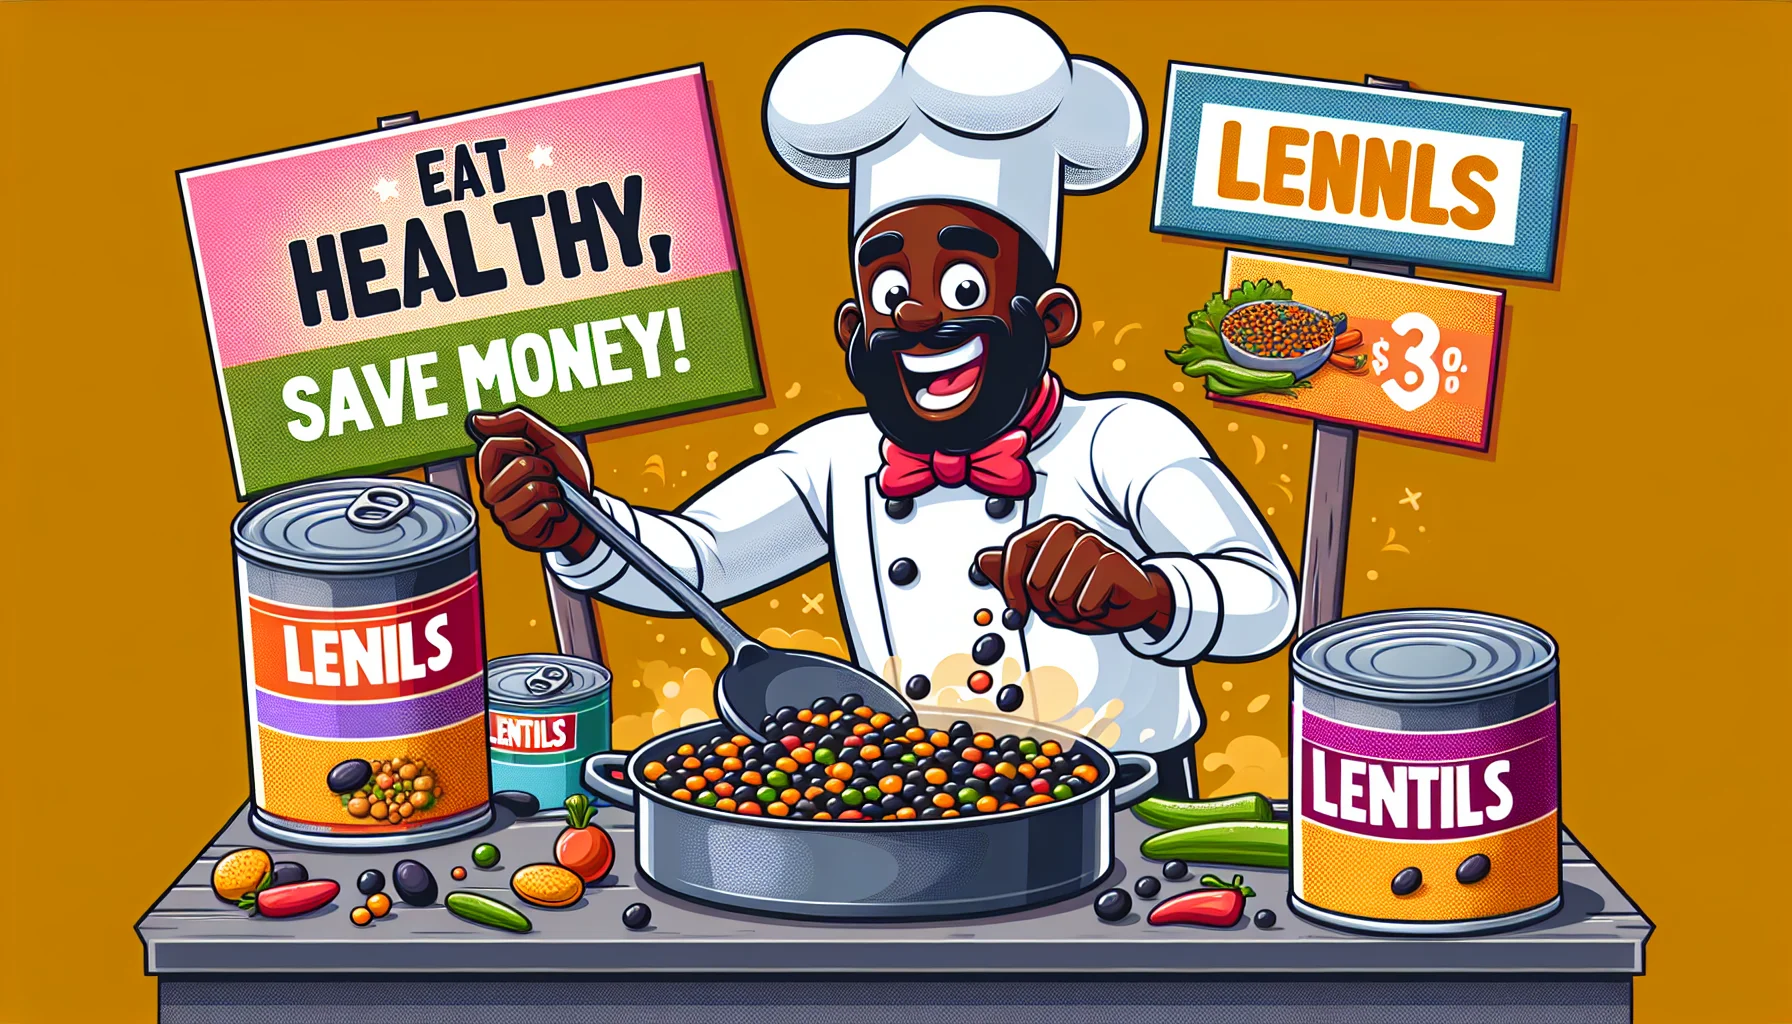 Design a colorful and cheerful kitchen scene where a goofy, cartoonish chef character of Black descent, is gleefully mixing a steaming pot of canned lentils. The lentils look so delicious, with bright colors indicating a variety of spices added. Scattered around are banners promoting healthy eating, one stating 'Eat Healthy, Save Money!' and another one showing a comparison of lentils price compared to fast food. The overall atmosphere communicates an invitation to enjoy cost-effective, nutritious food.